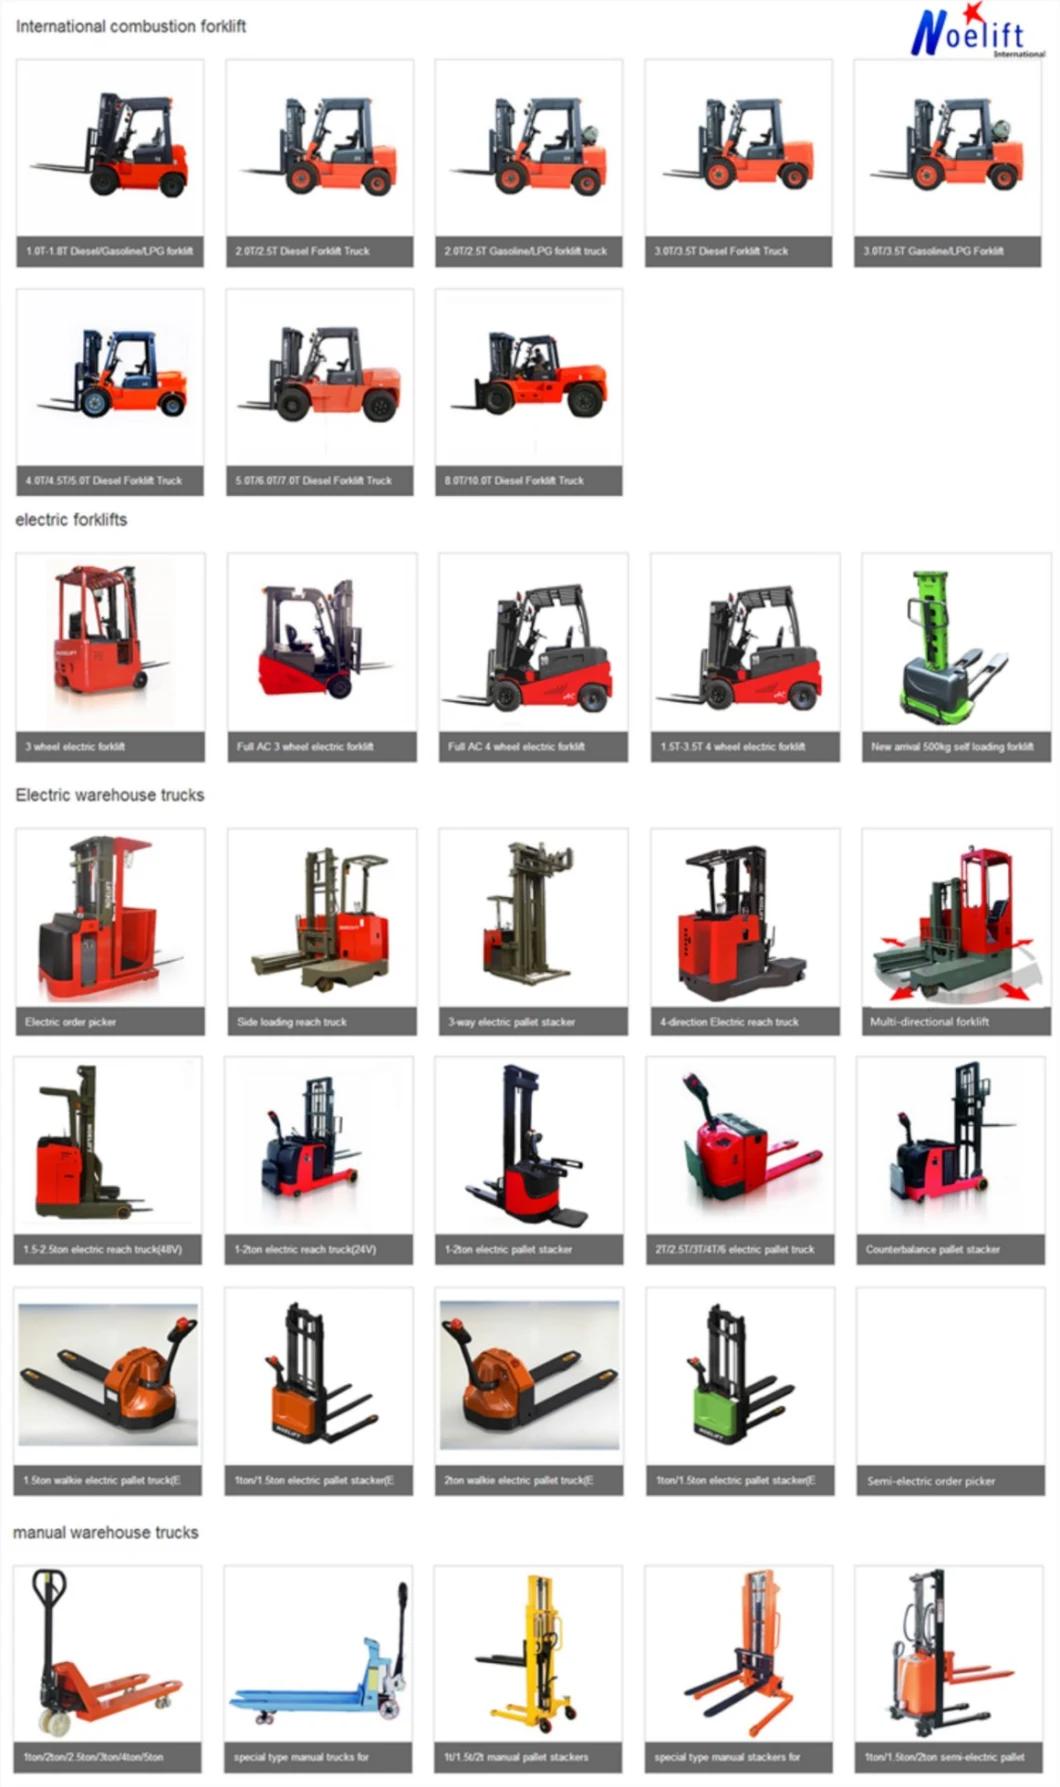 2.5 Ton Counter Balance Electric Forklift with 4 Wheel